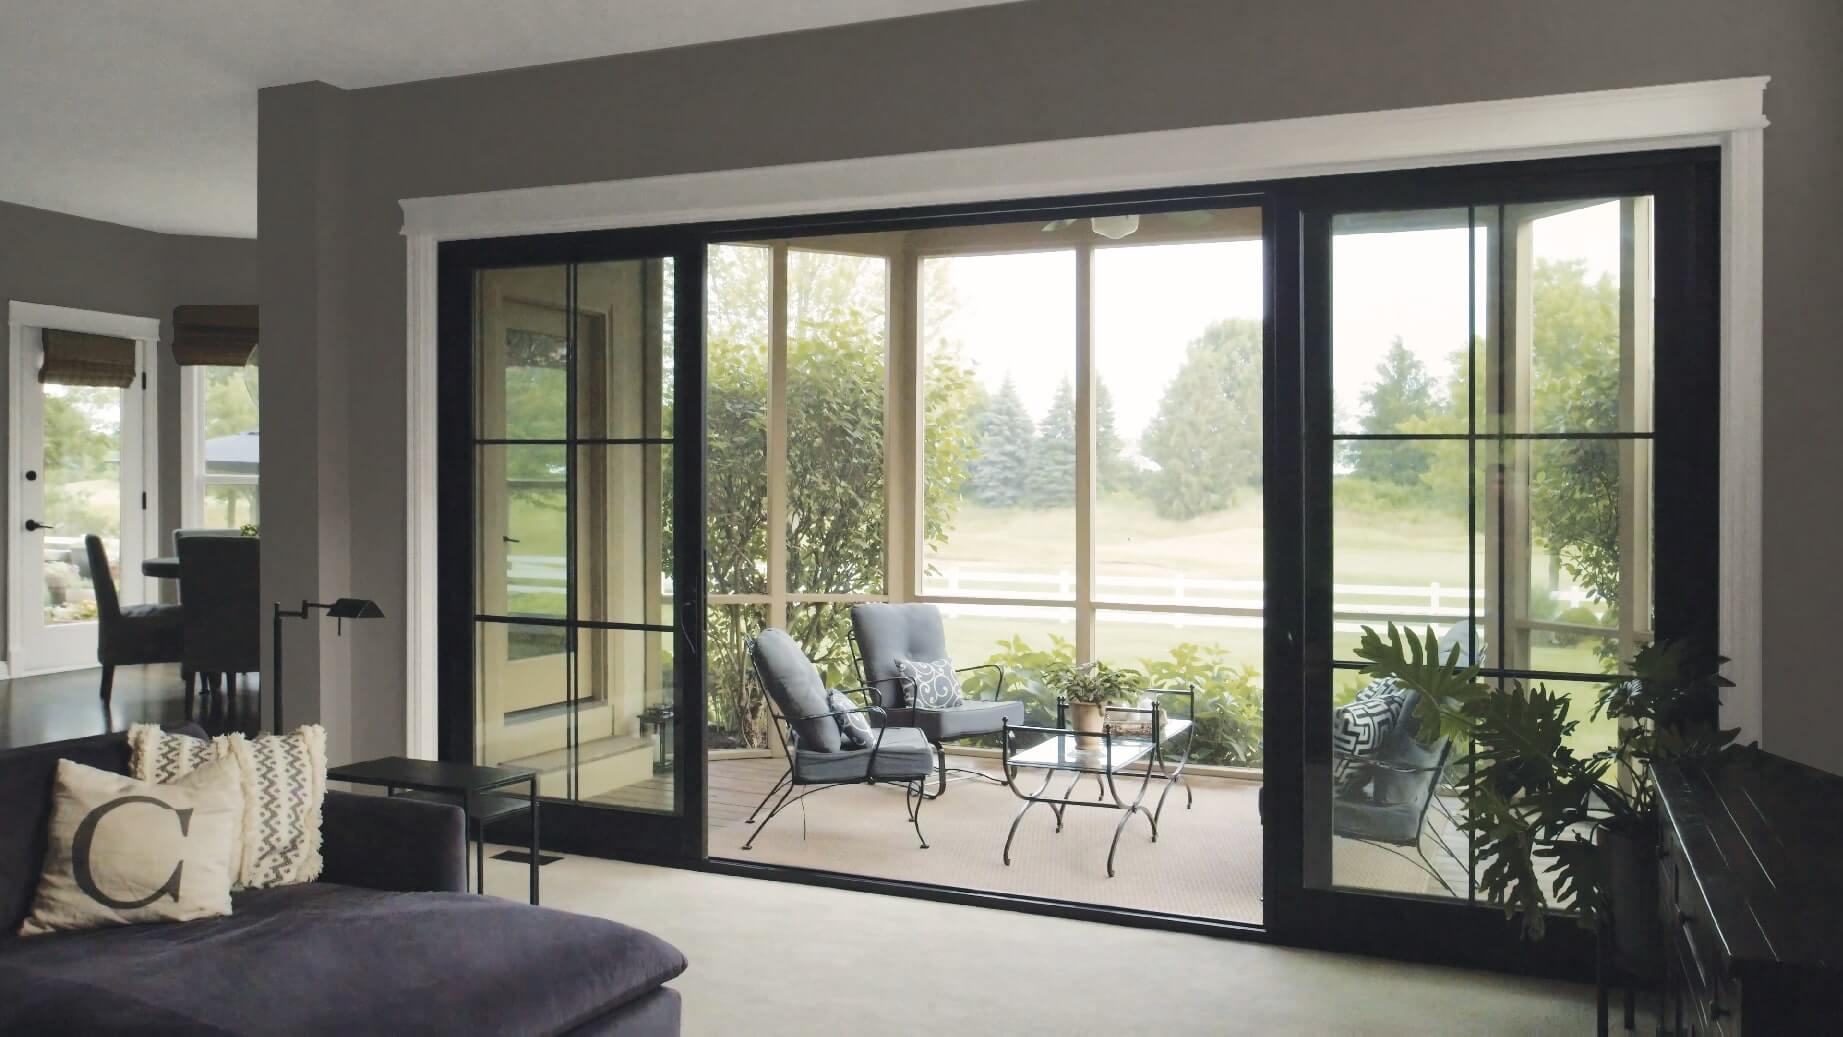 What is the best brand for sliding doors?